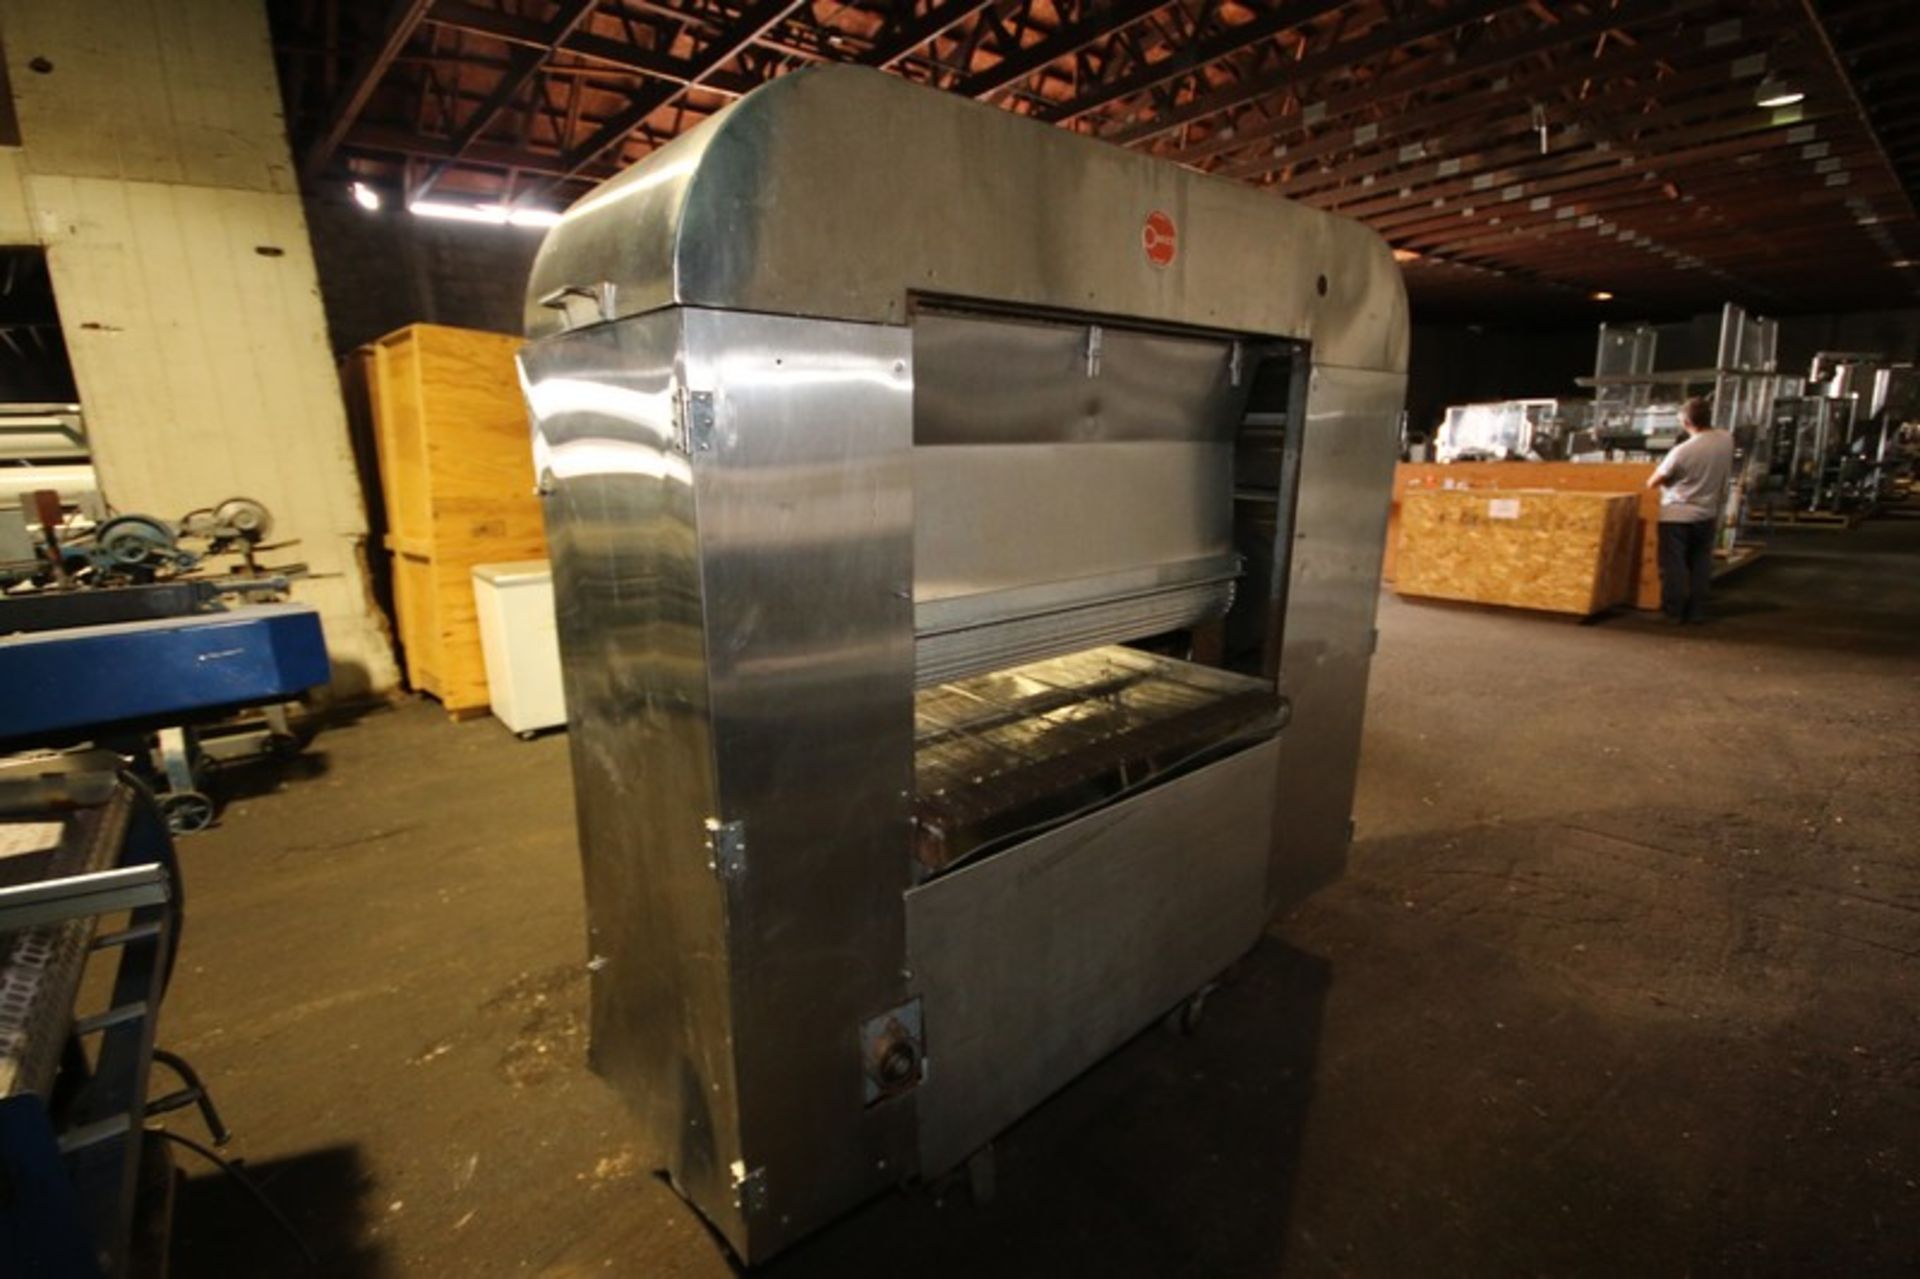 Oates S/S Depositor with 42" W Belt (INV#65769)(Located at the MDG Auction Showroom in Pittsburgh, - Image 3 of 7